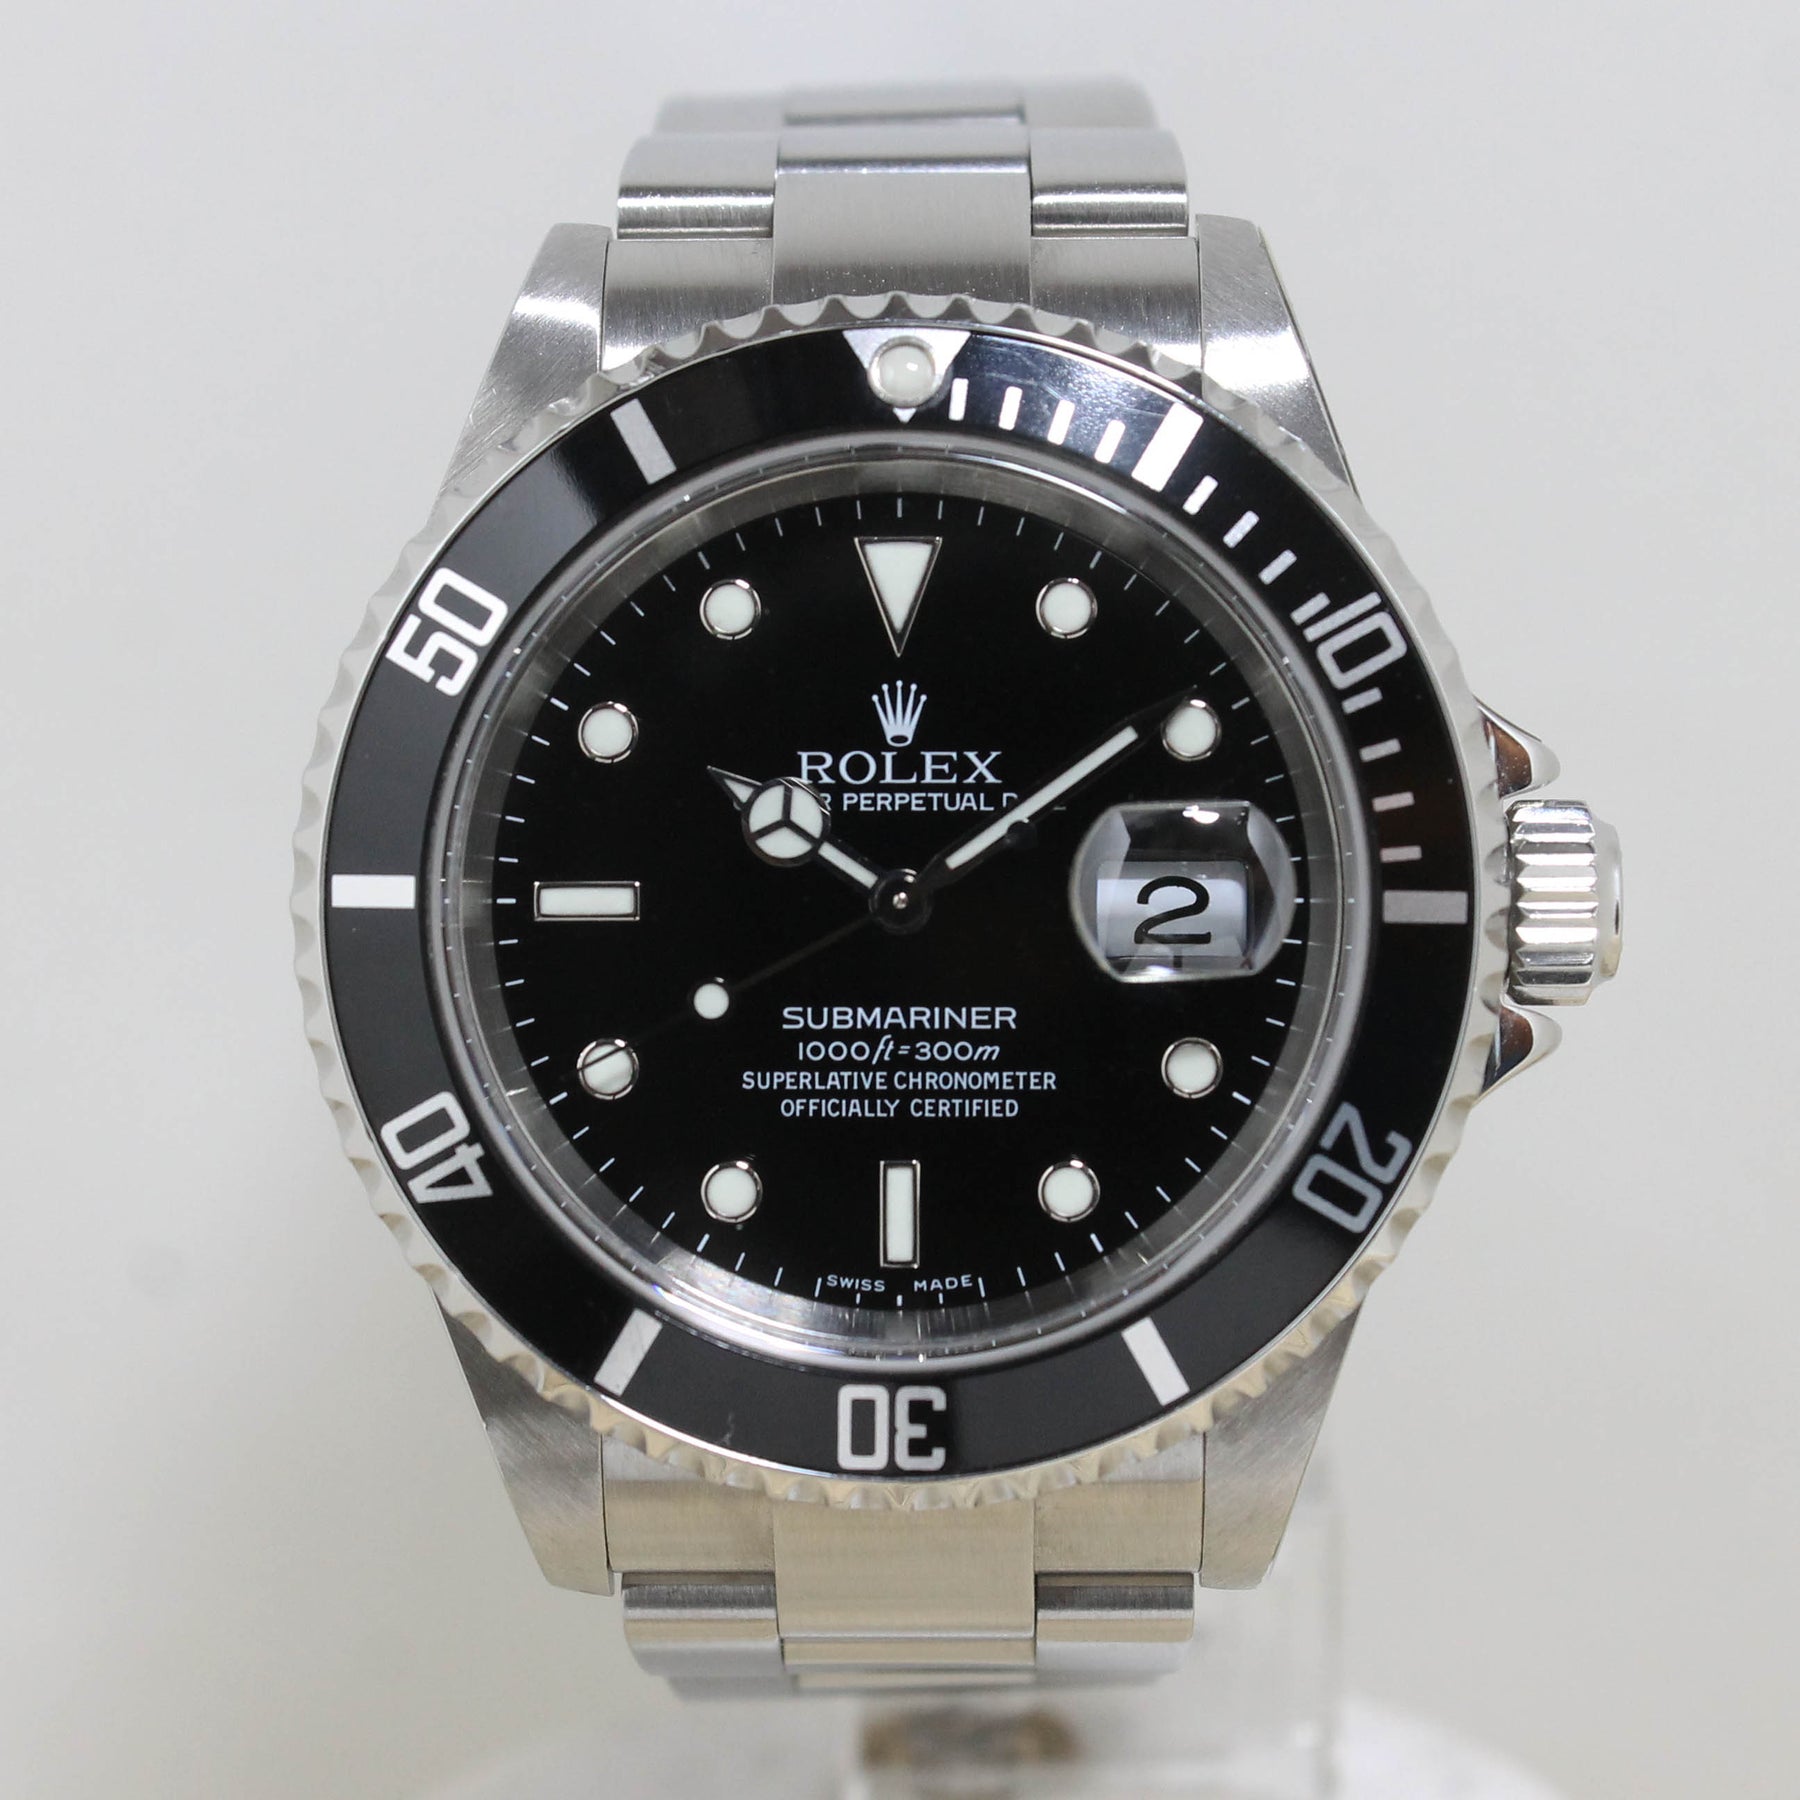 2005 Rolex Submariner Ref. 16610 (with Box & Papers)